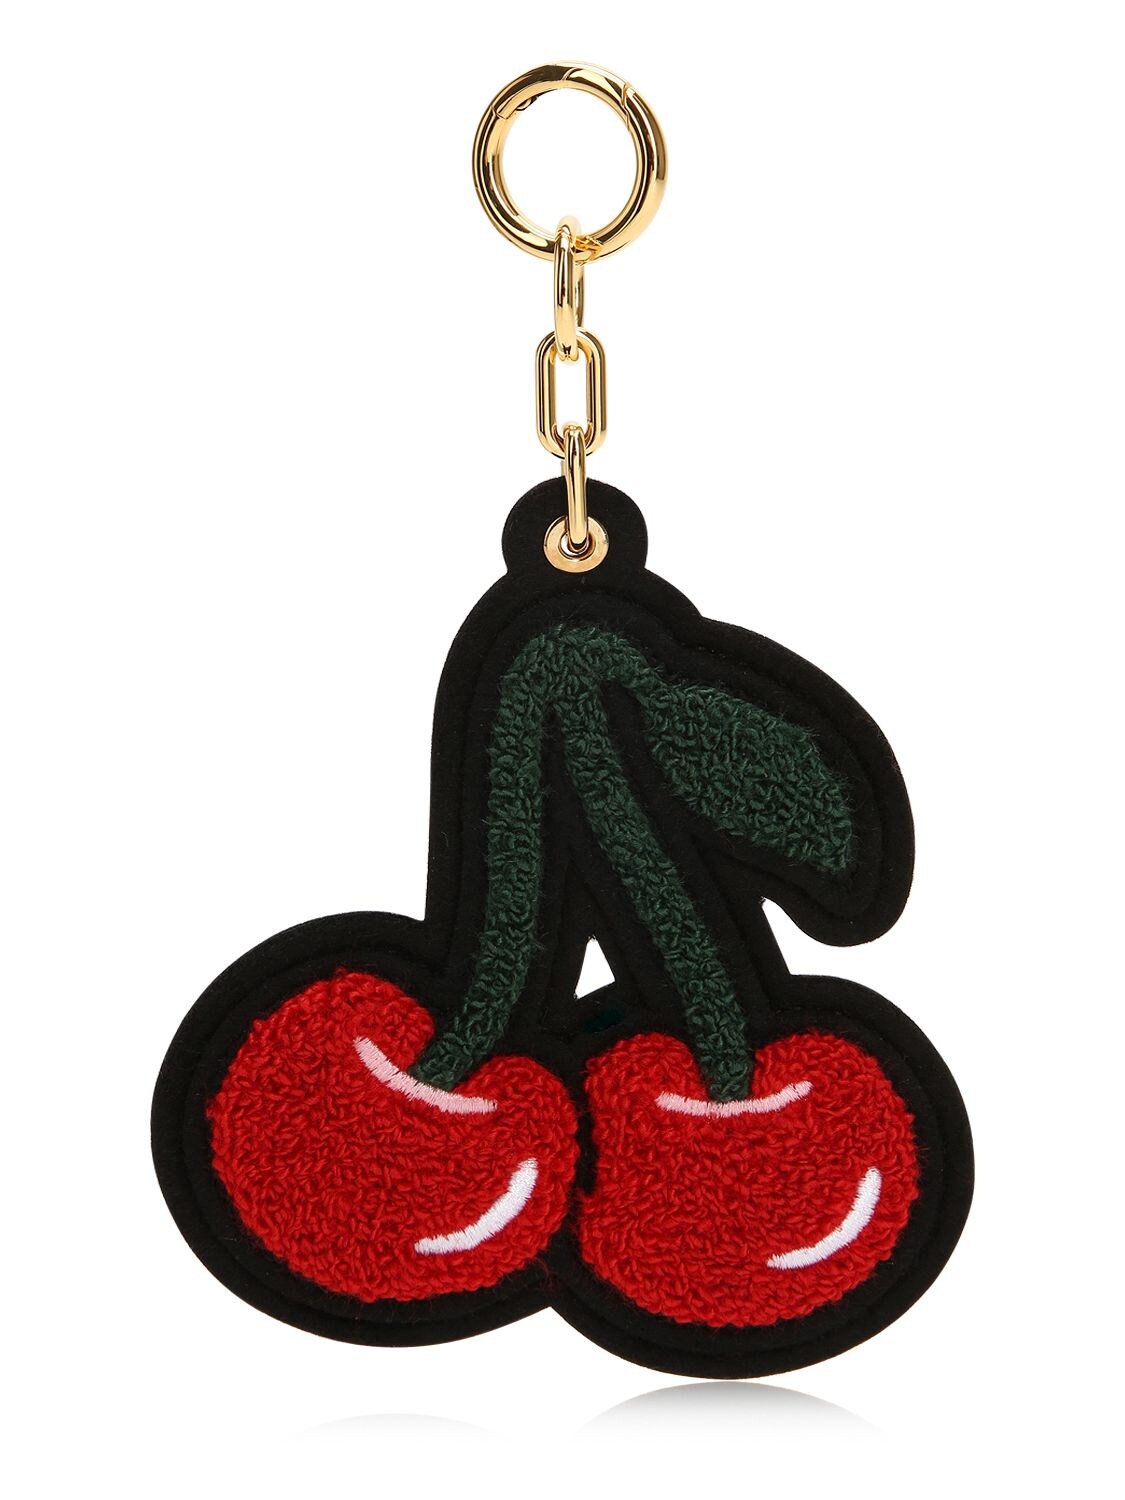 CHAOS BAG CHARM CHENILLE RED CHERRY,68IWRV030-UKVE0